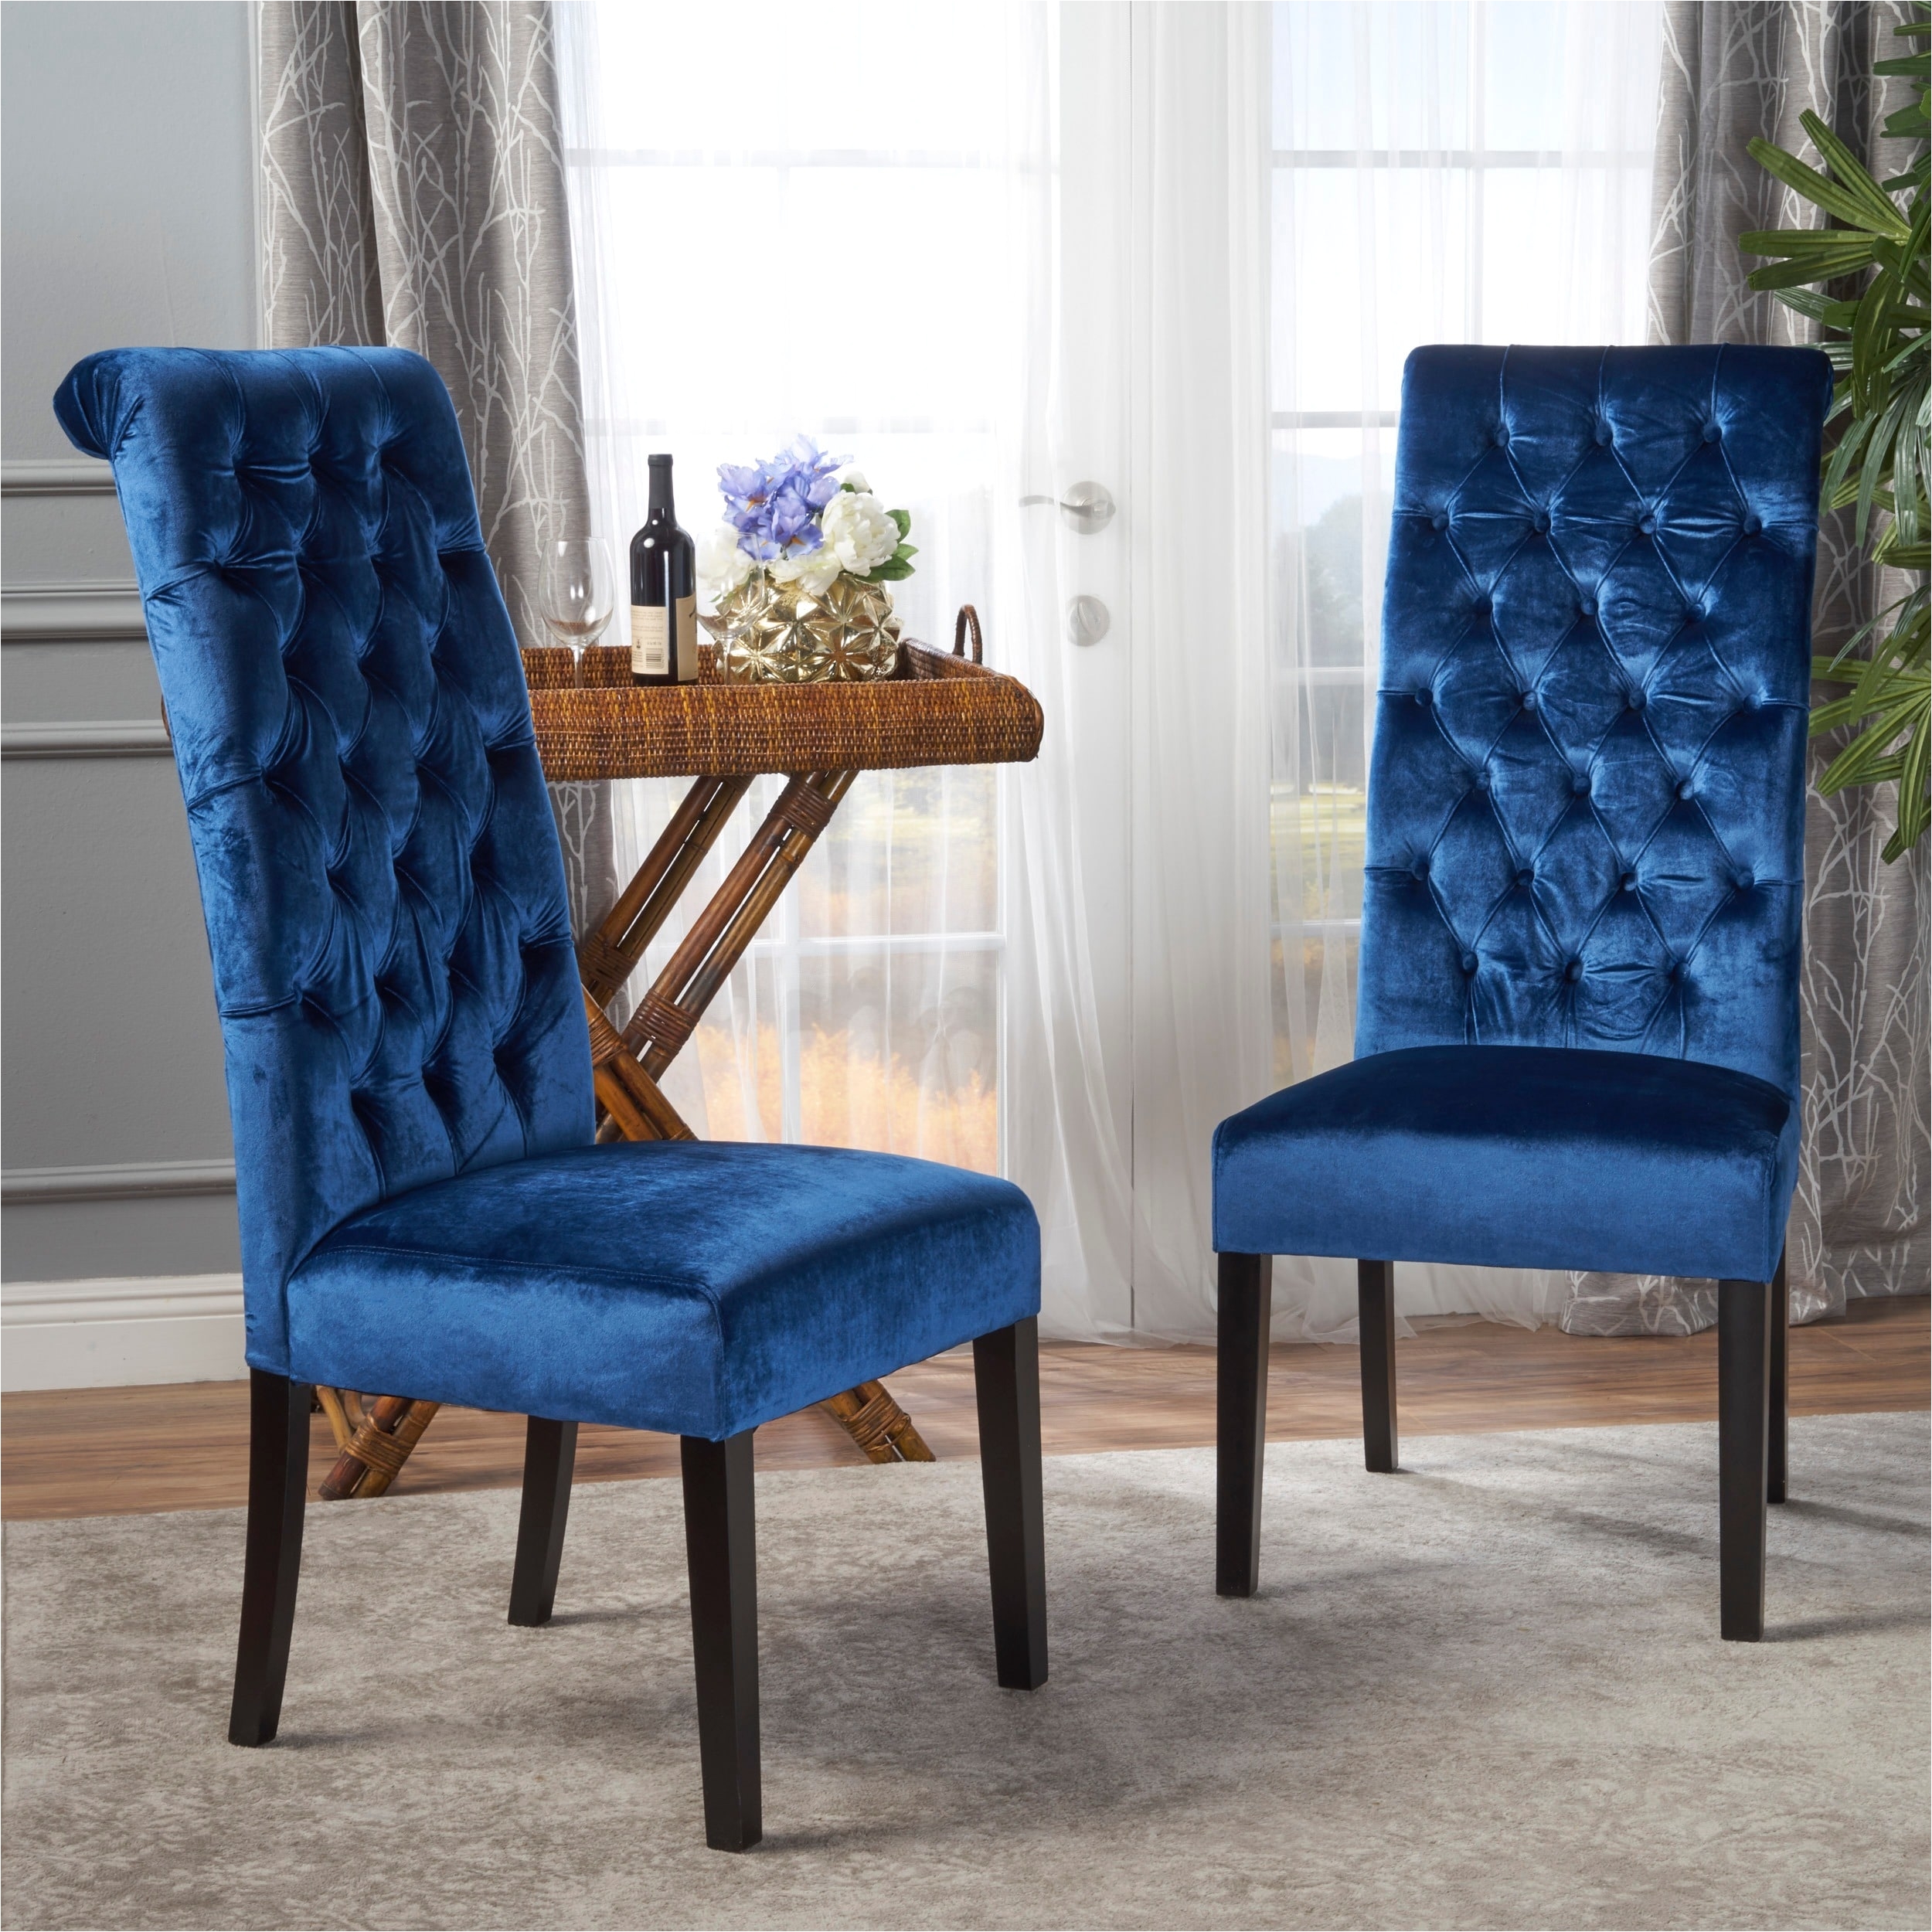 full size of chair leorah tall back tufted velvet dining set of pertaining to the stylish